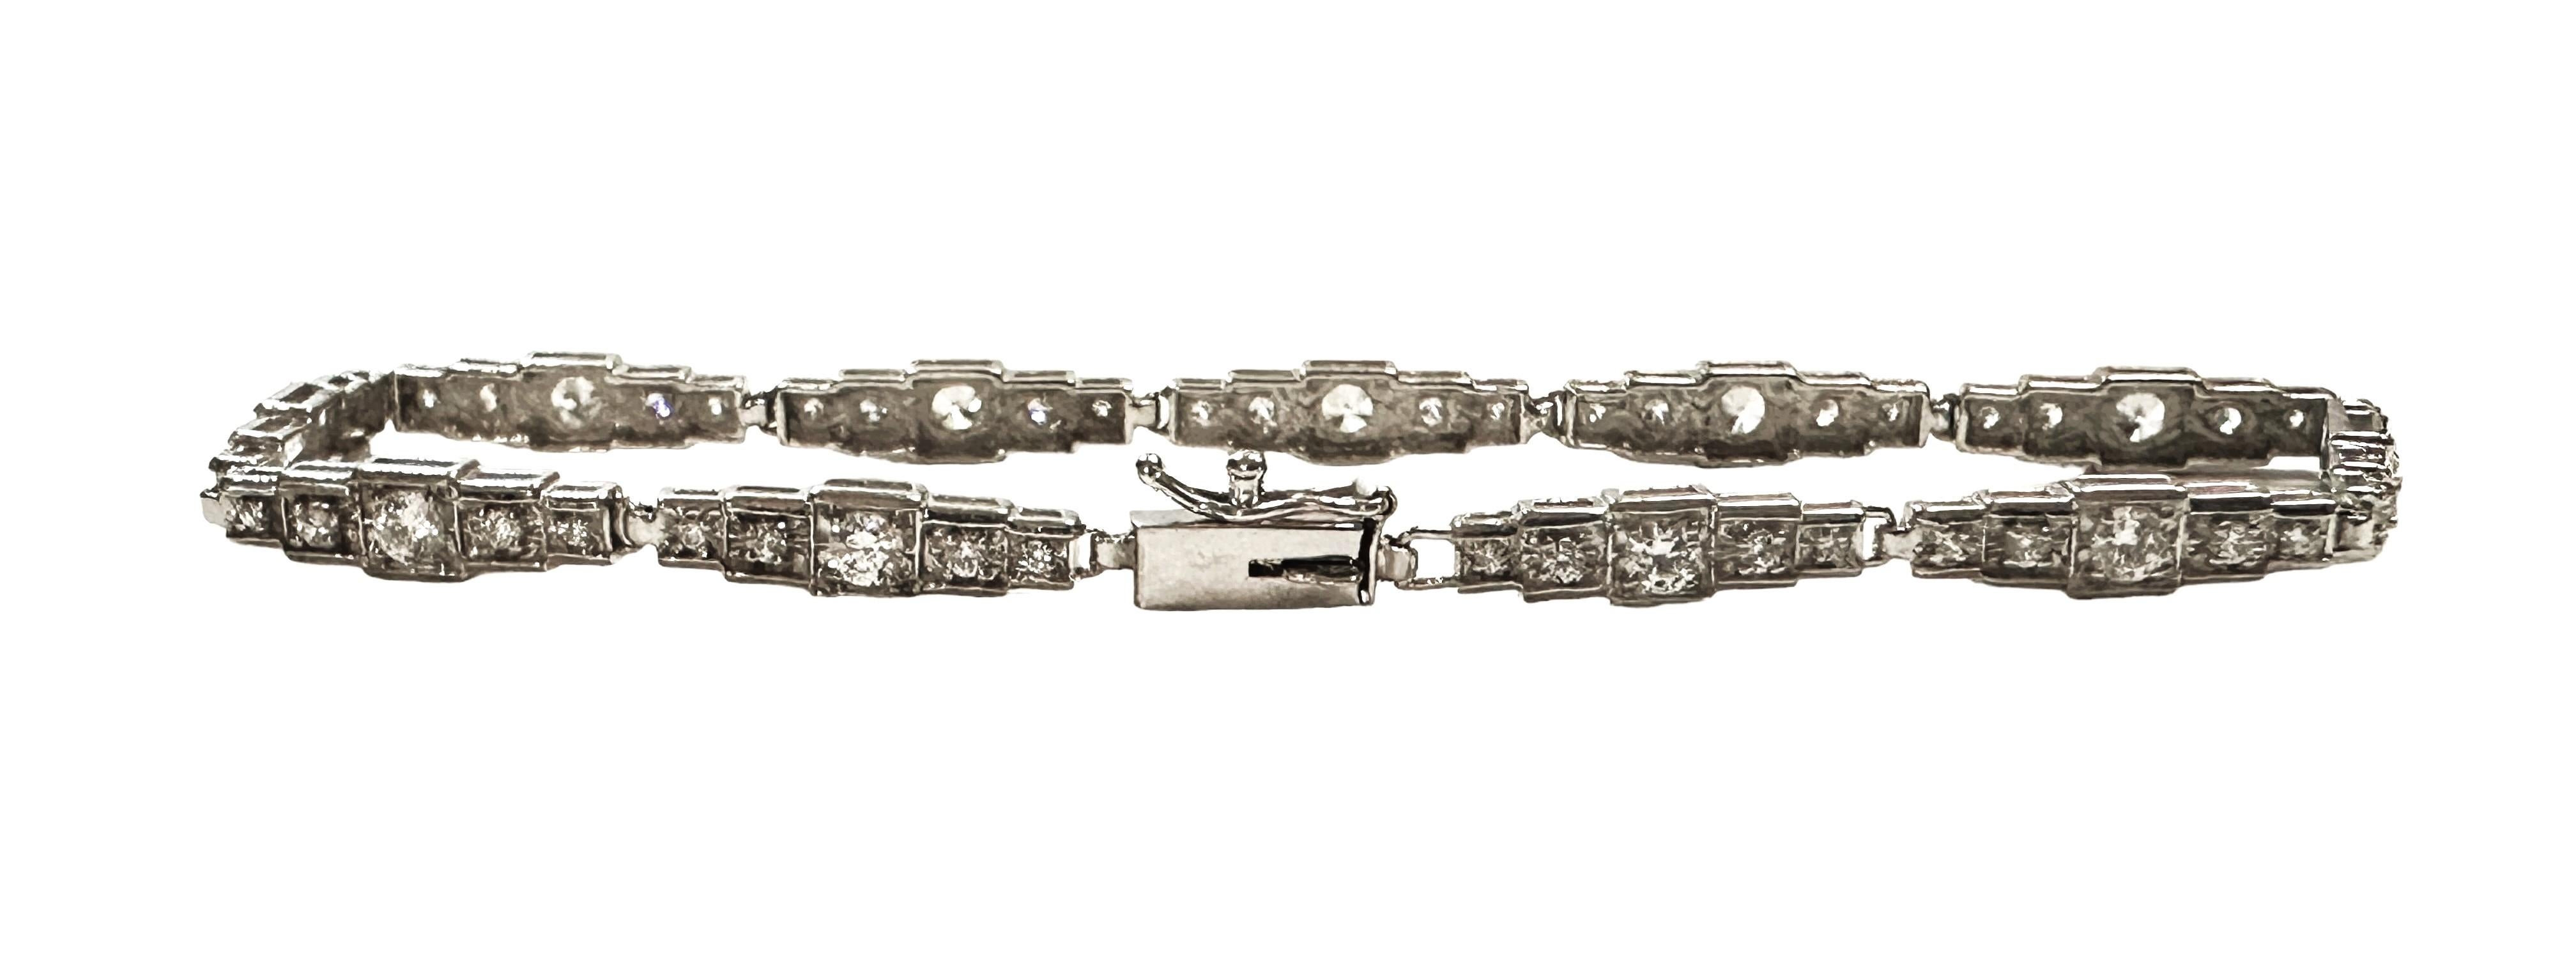 What a gorgeous bracelet!!  It is just dainty and beautiful.  The stones are crystal but they glisten like diamonds.  The bracelet is 7 inches long and has a slide closure along with a safety clasp. It is stamped 